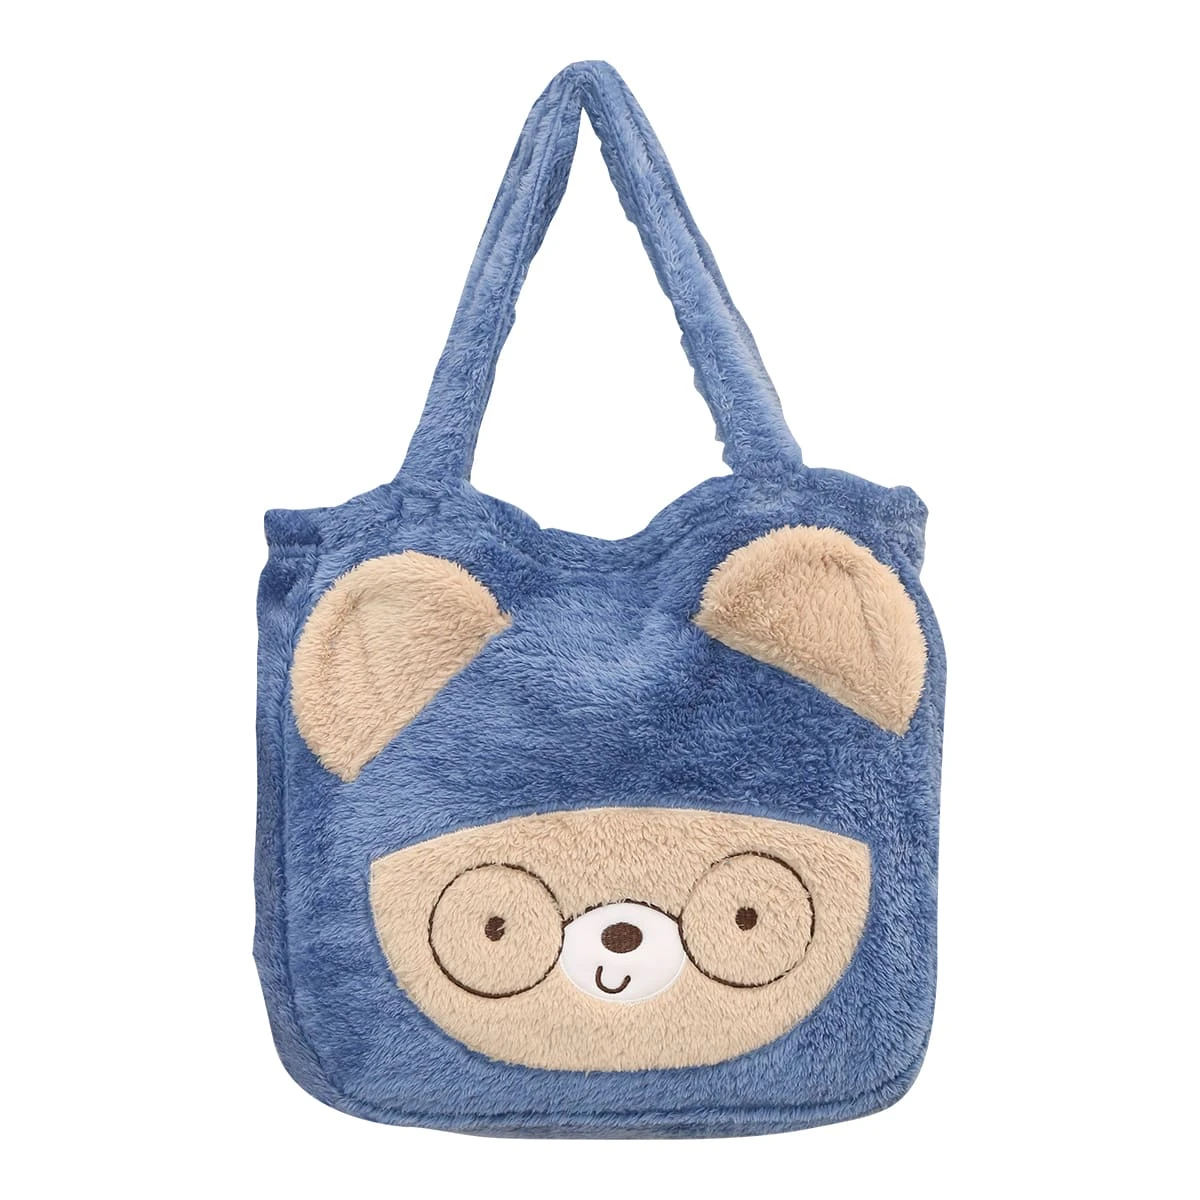 Recycled Polyester Fluffy Plush Tote Bag Blanket with Bear Design (Dark Blue)